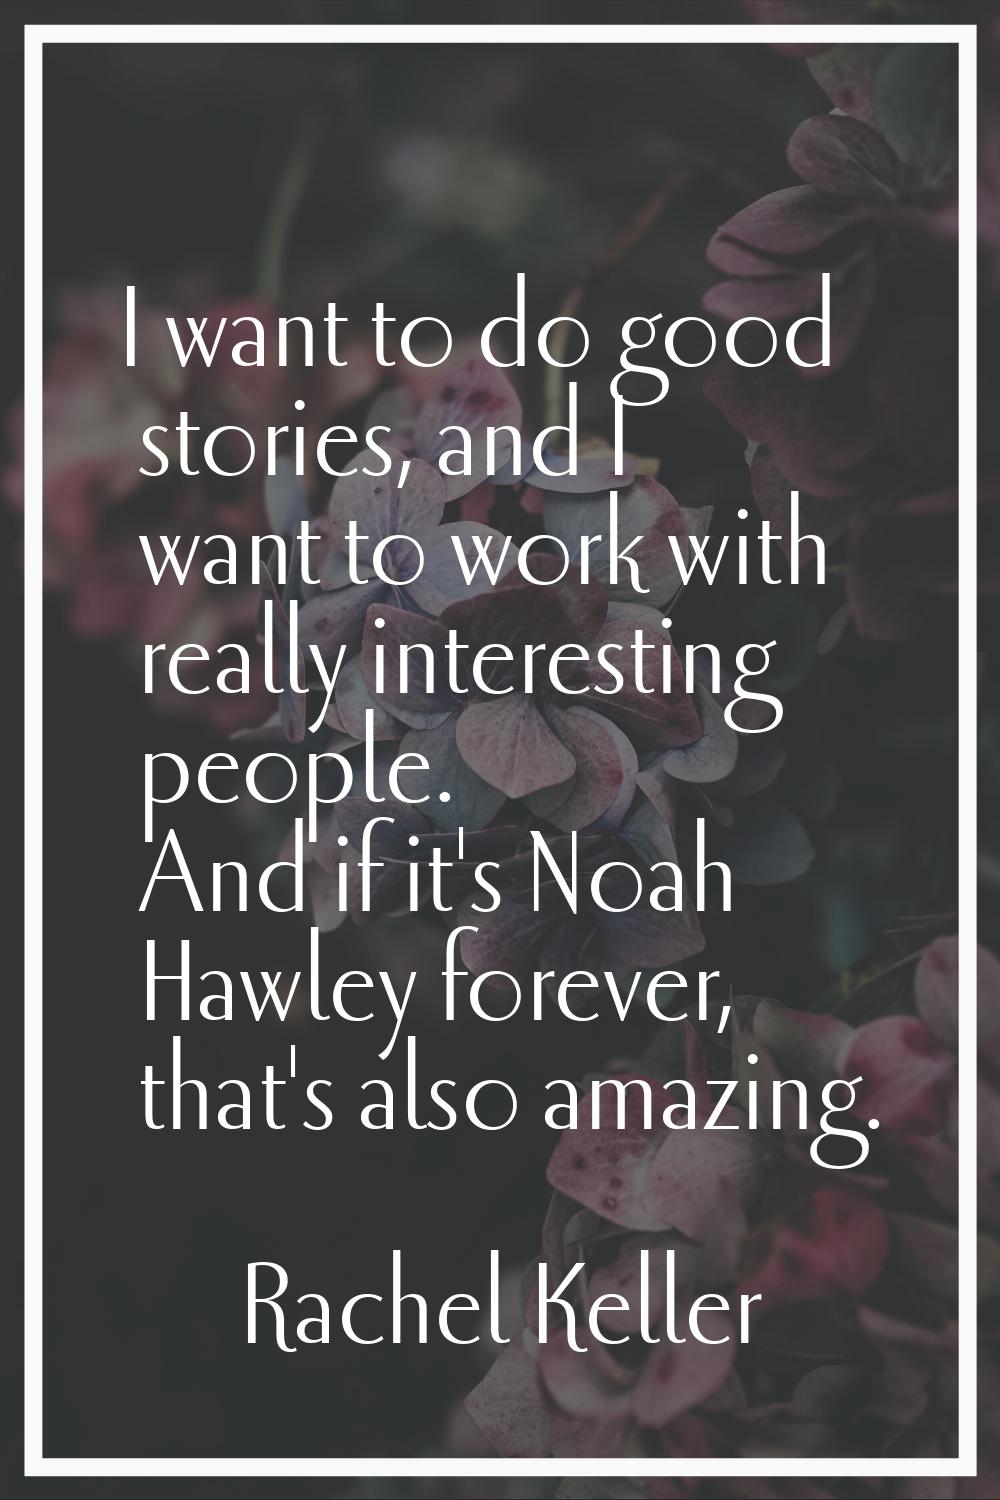 I want to do good stories, and I want to work with really interesting people. And if it's Noah Hawl